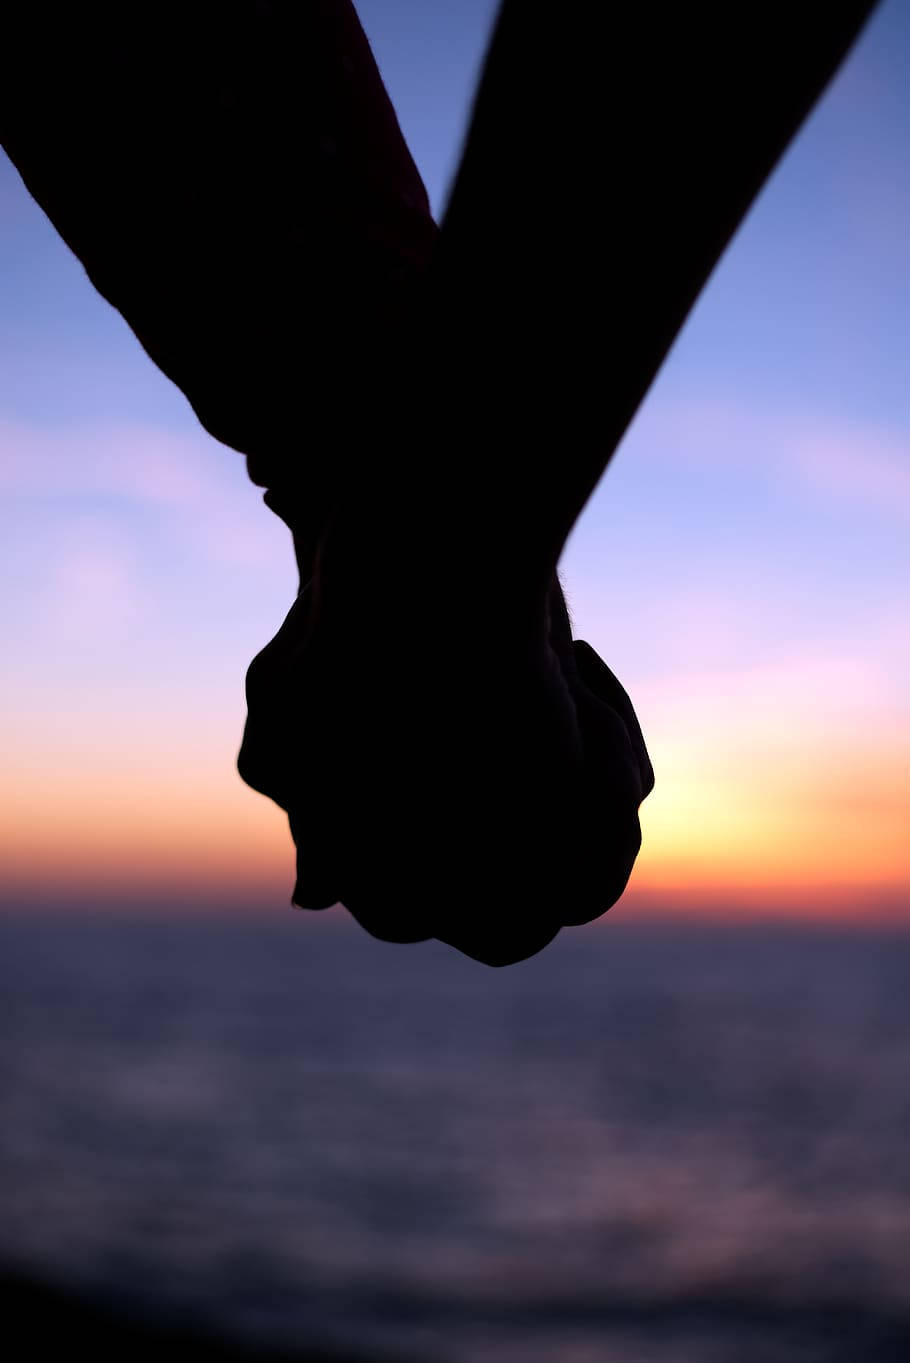 Holding Hands Silhouette In Horizon Sunset